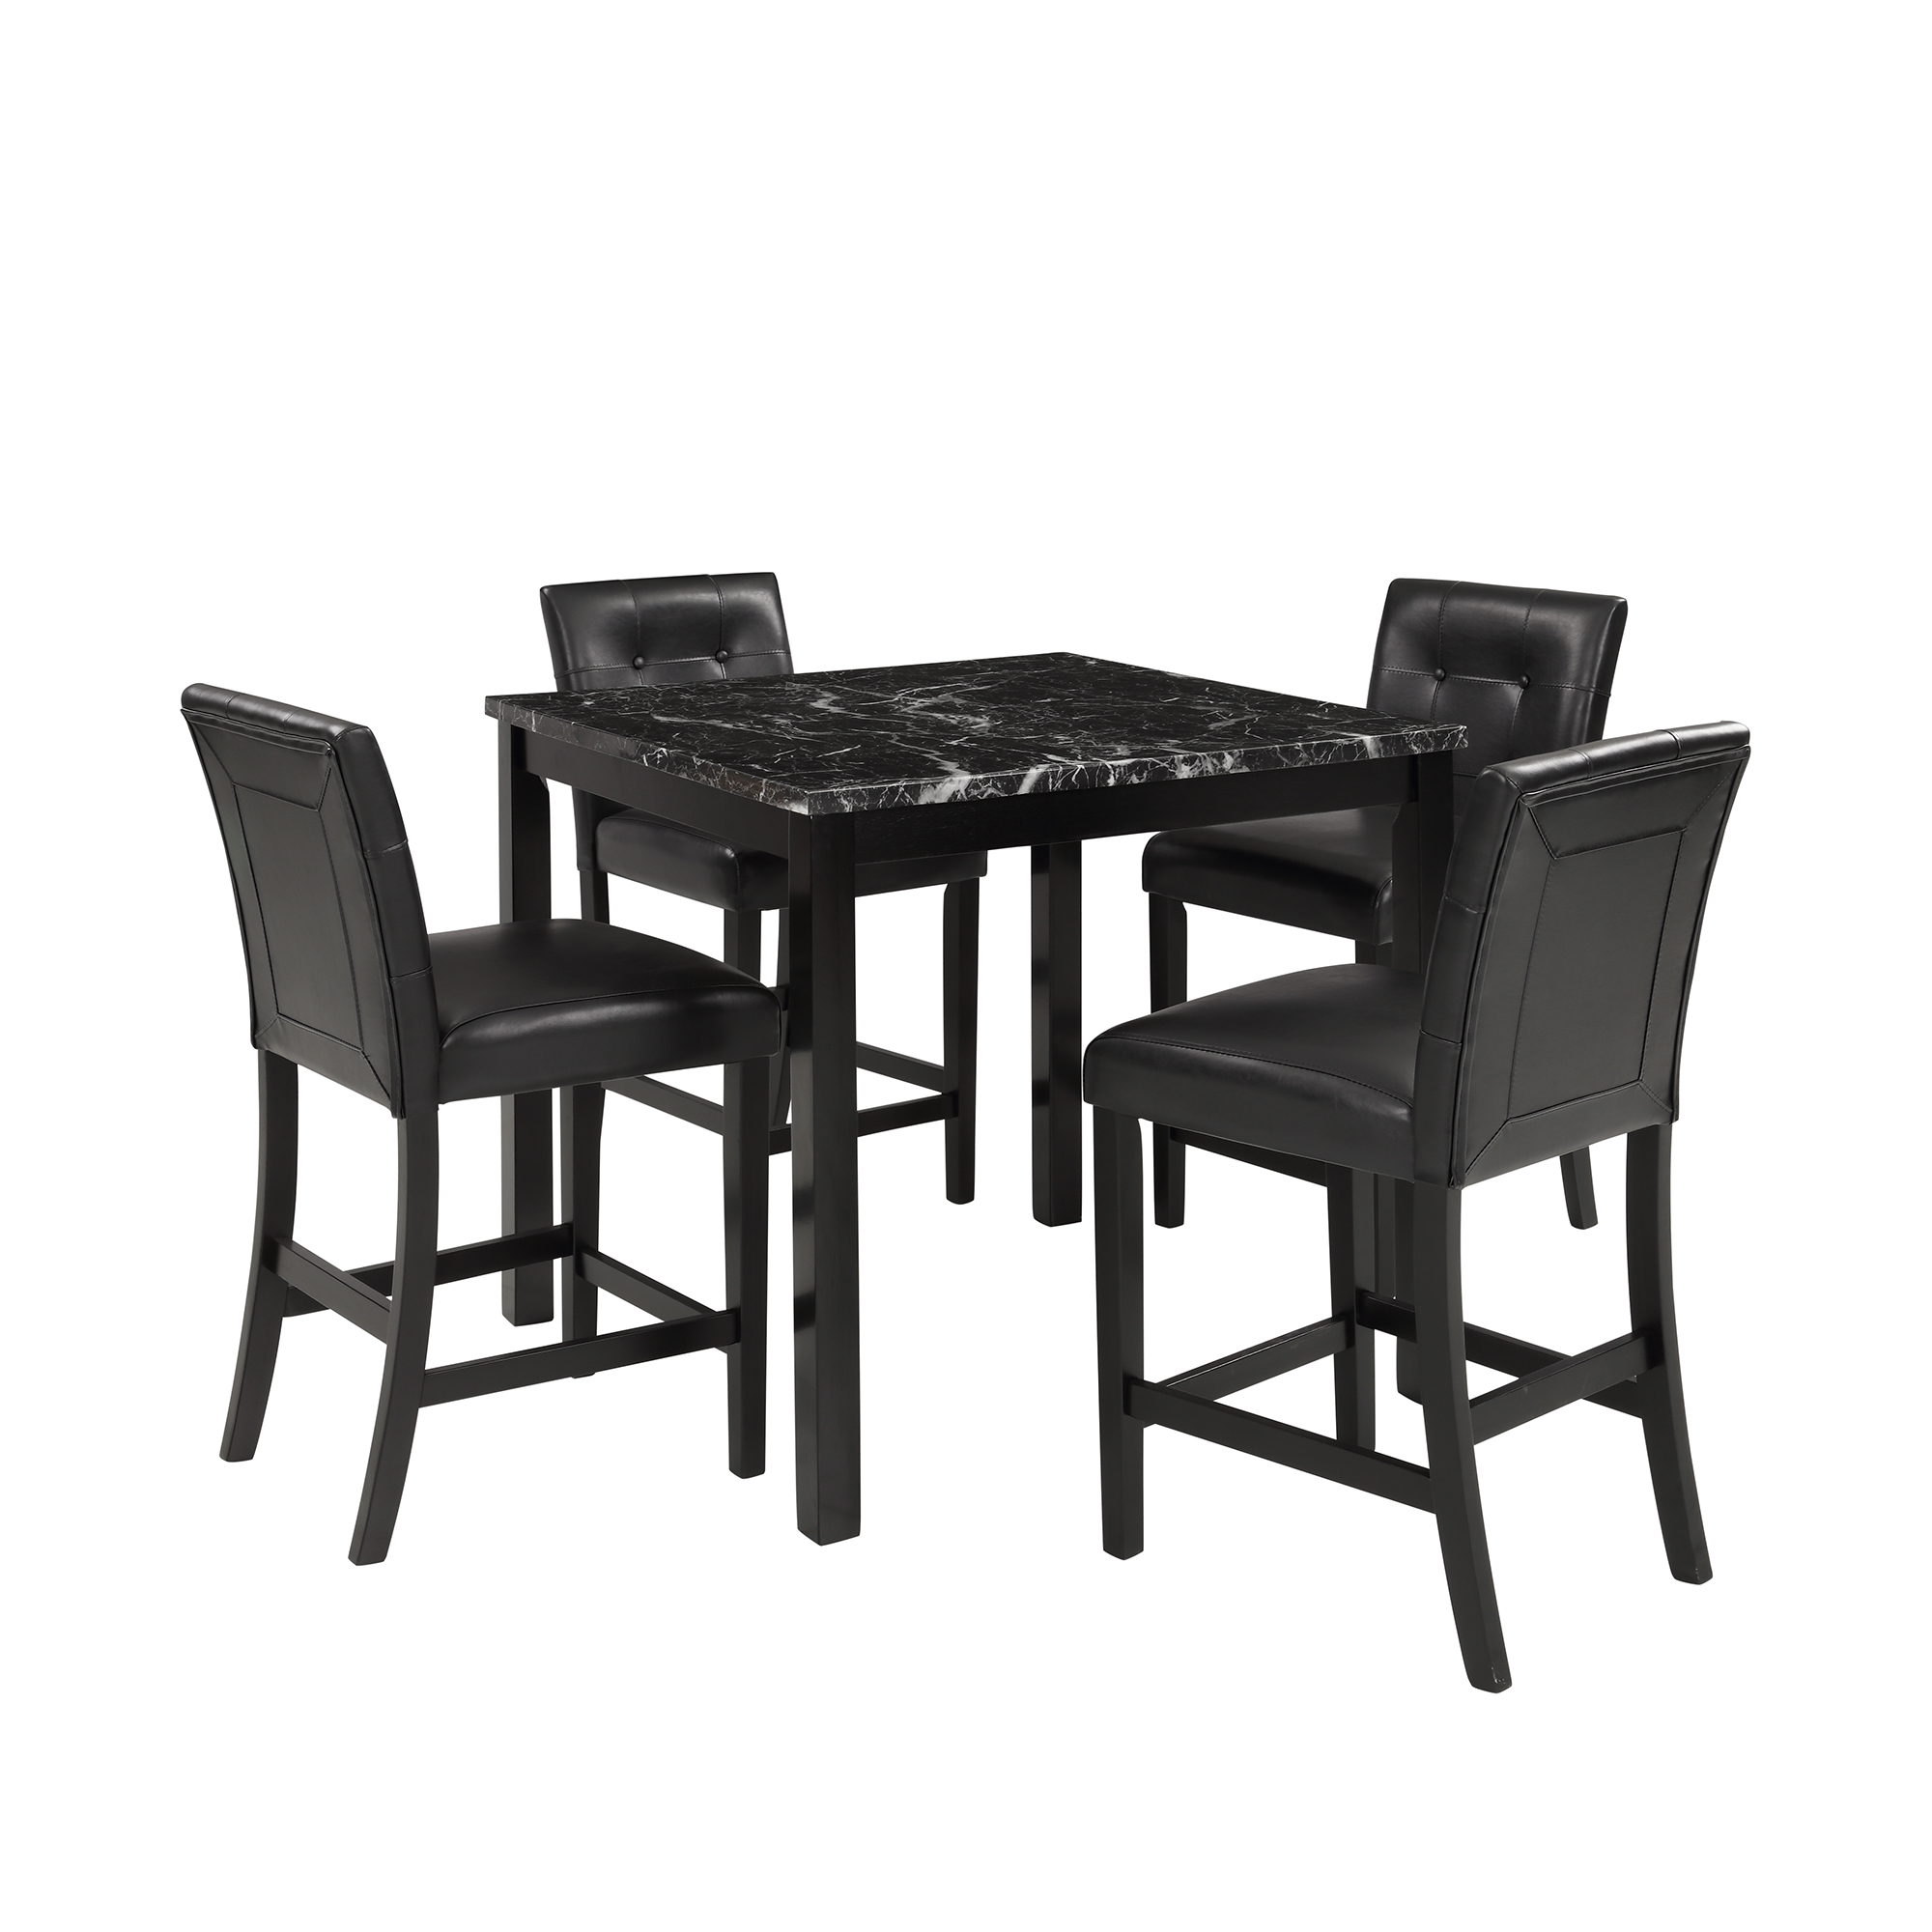  5-Piece Kitchen Table Set Marble Top Counter Height Dining Table Set with 4 Leather-Upholstered Chairs (Black)-CASAINC